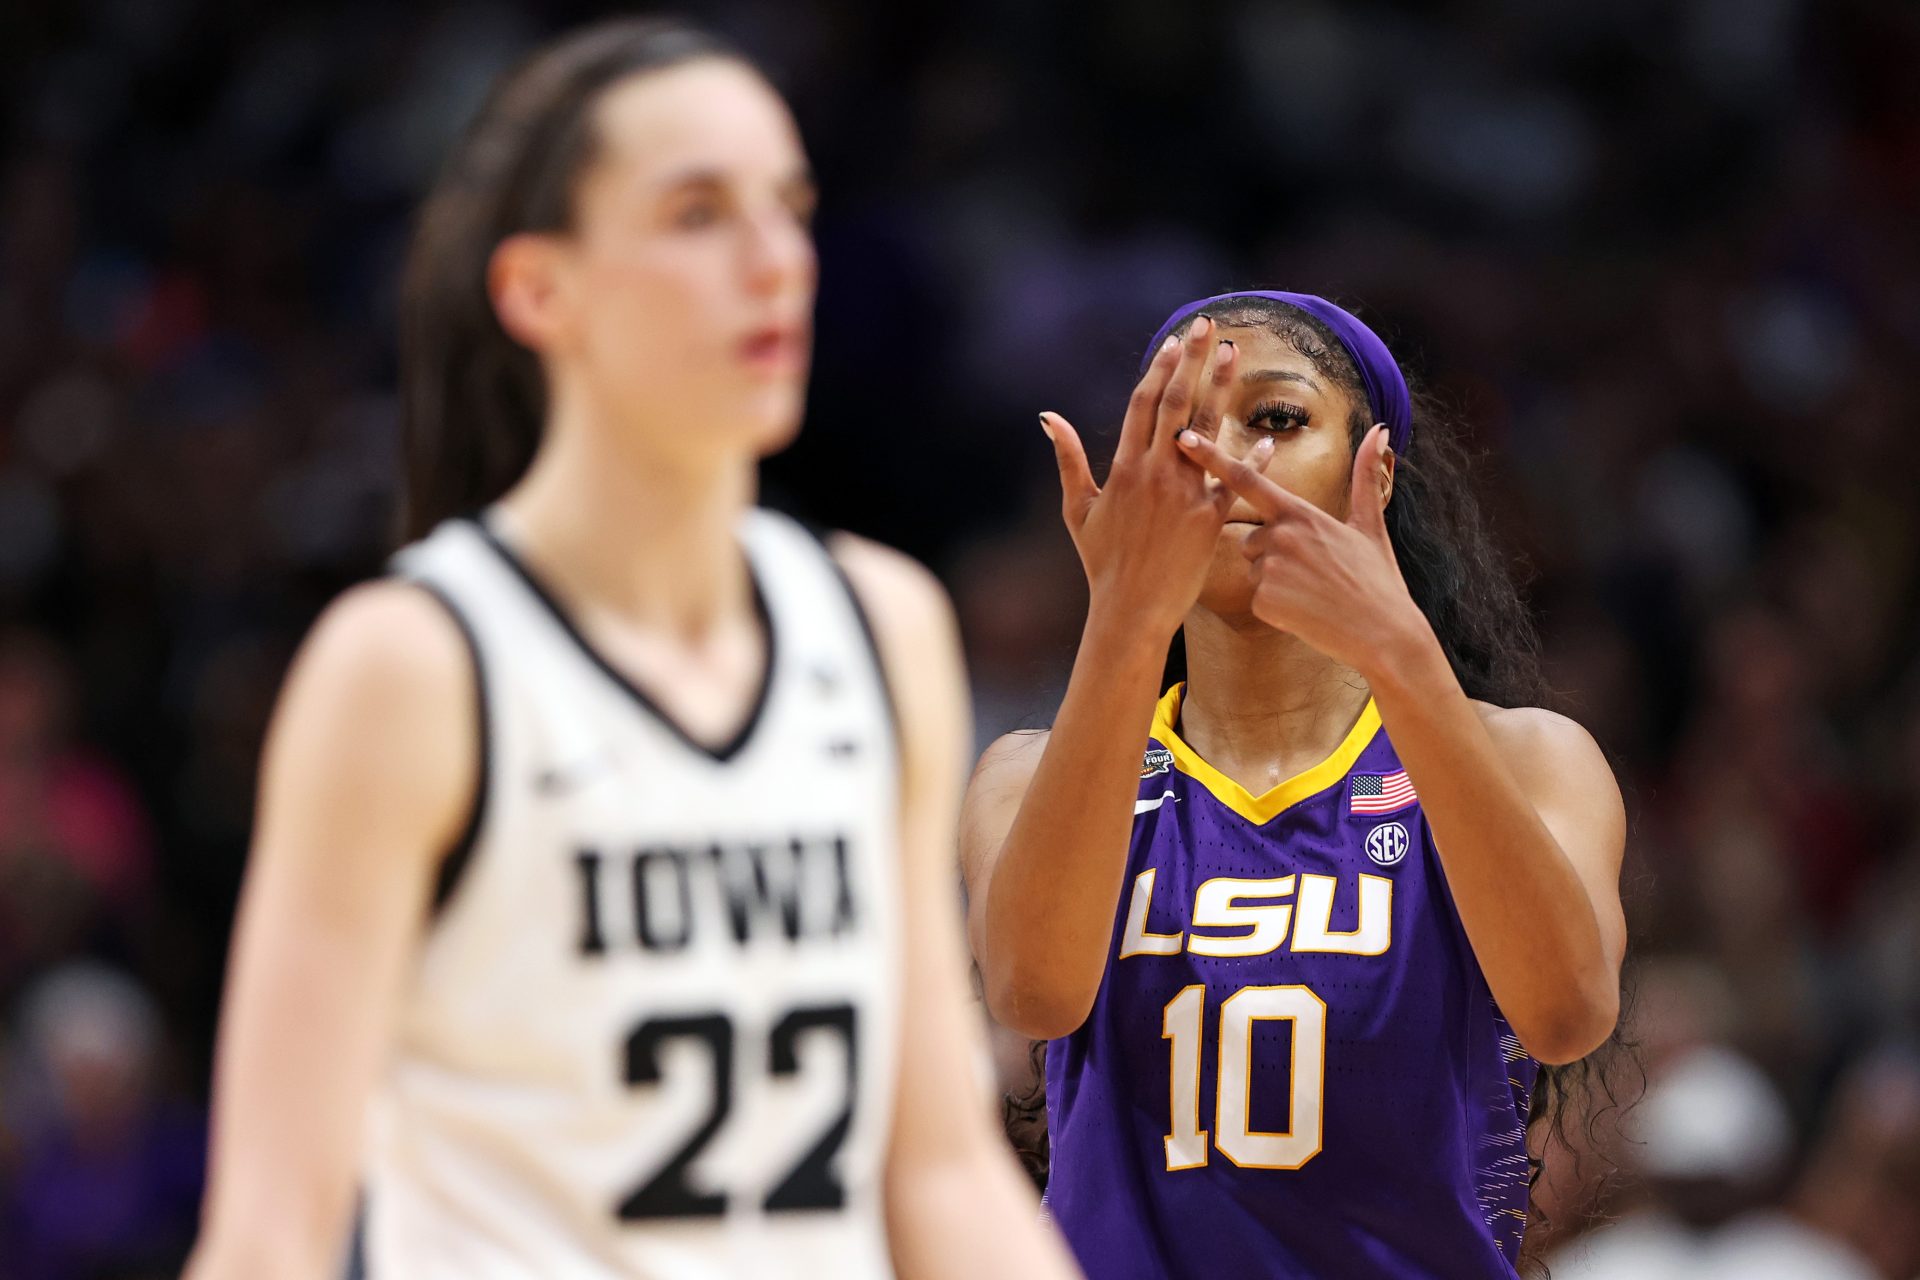 LSU’s Angel Reese Defends Taunting Back Iowa’s Caitlin Clark In NCAA Title Win, Garners Support